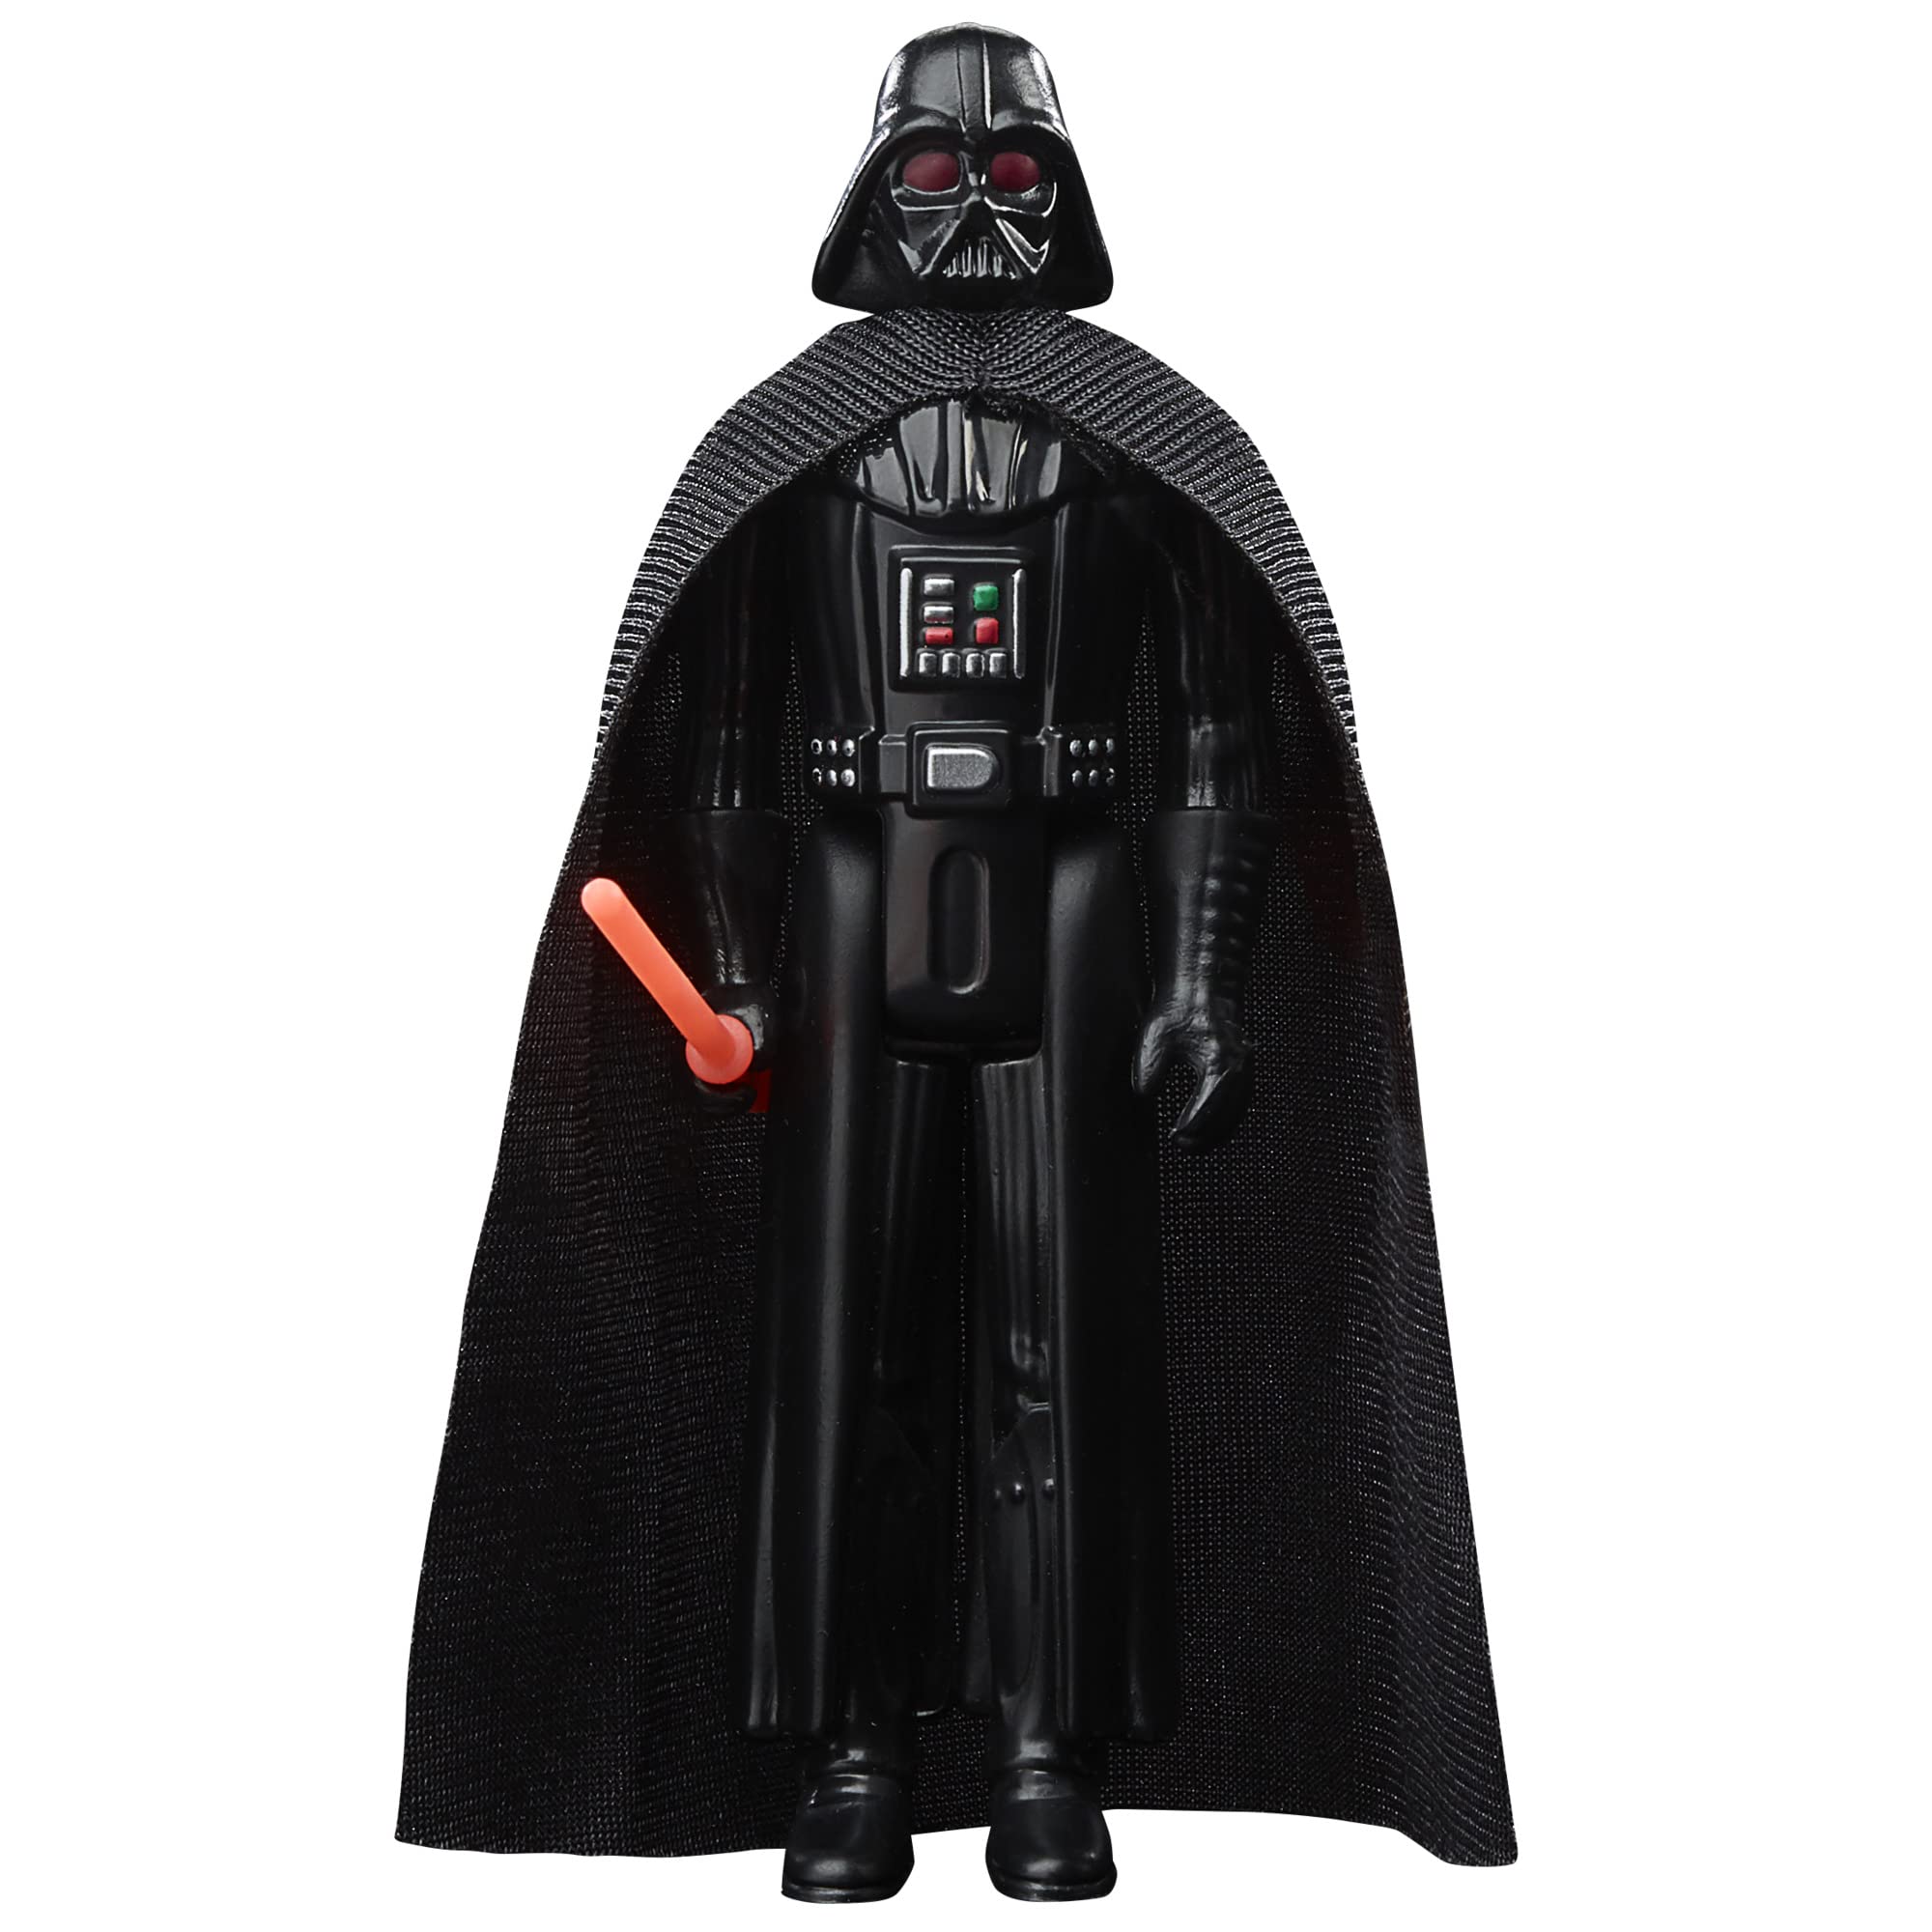 STAR WARS Retro Collection Darth Vader (The Dark Times) Toy 3.75-Inch-Scale OBI-Wan Kenobi Figure, Toys for Kids Ages 4 and Up, Multicolored, F5771